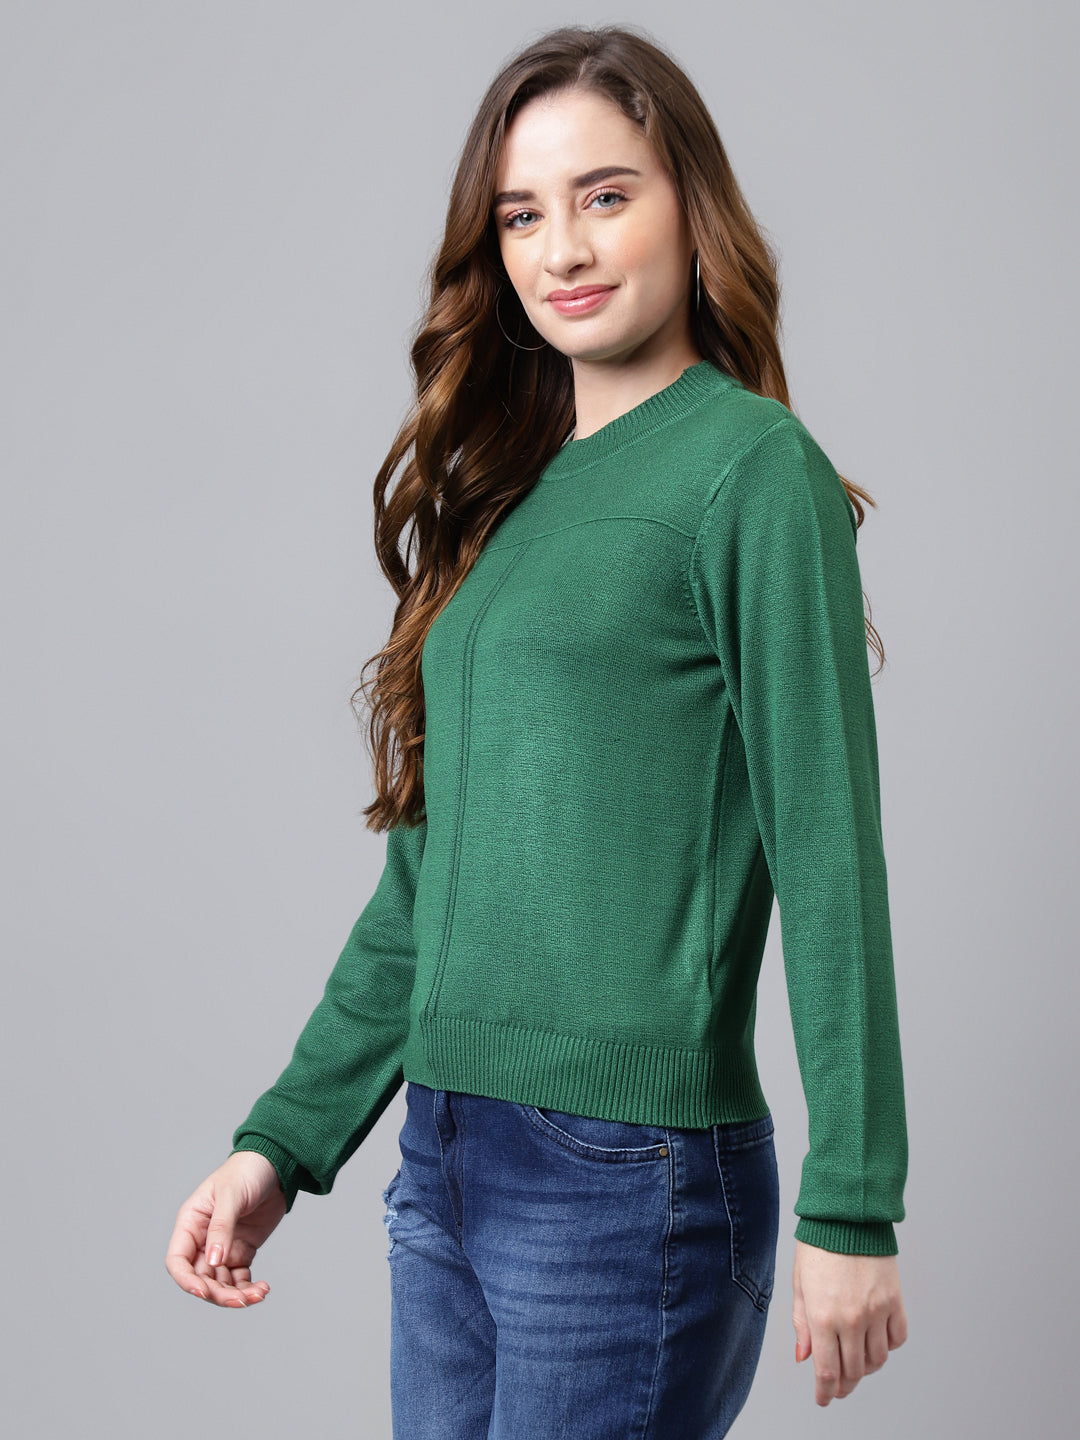 Greenforst Full Sleeve Solid Normal Pullover Sweatertop